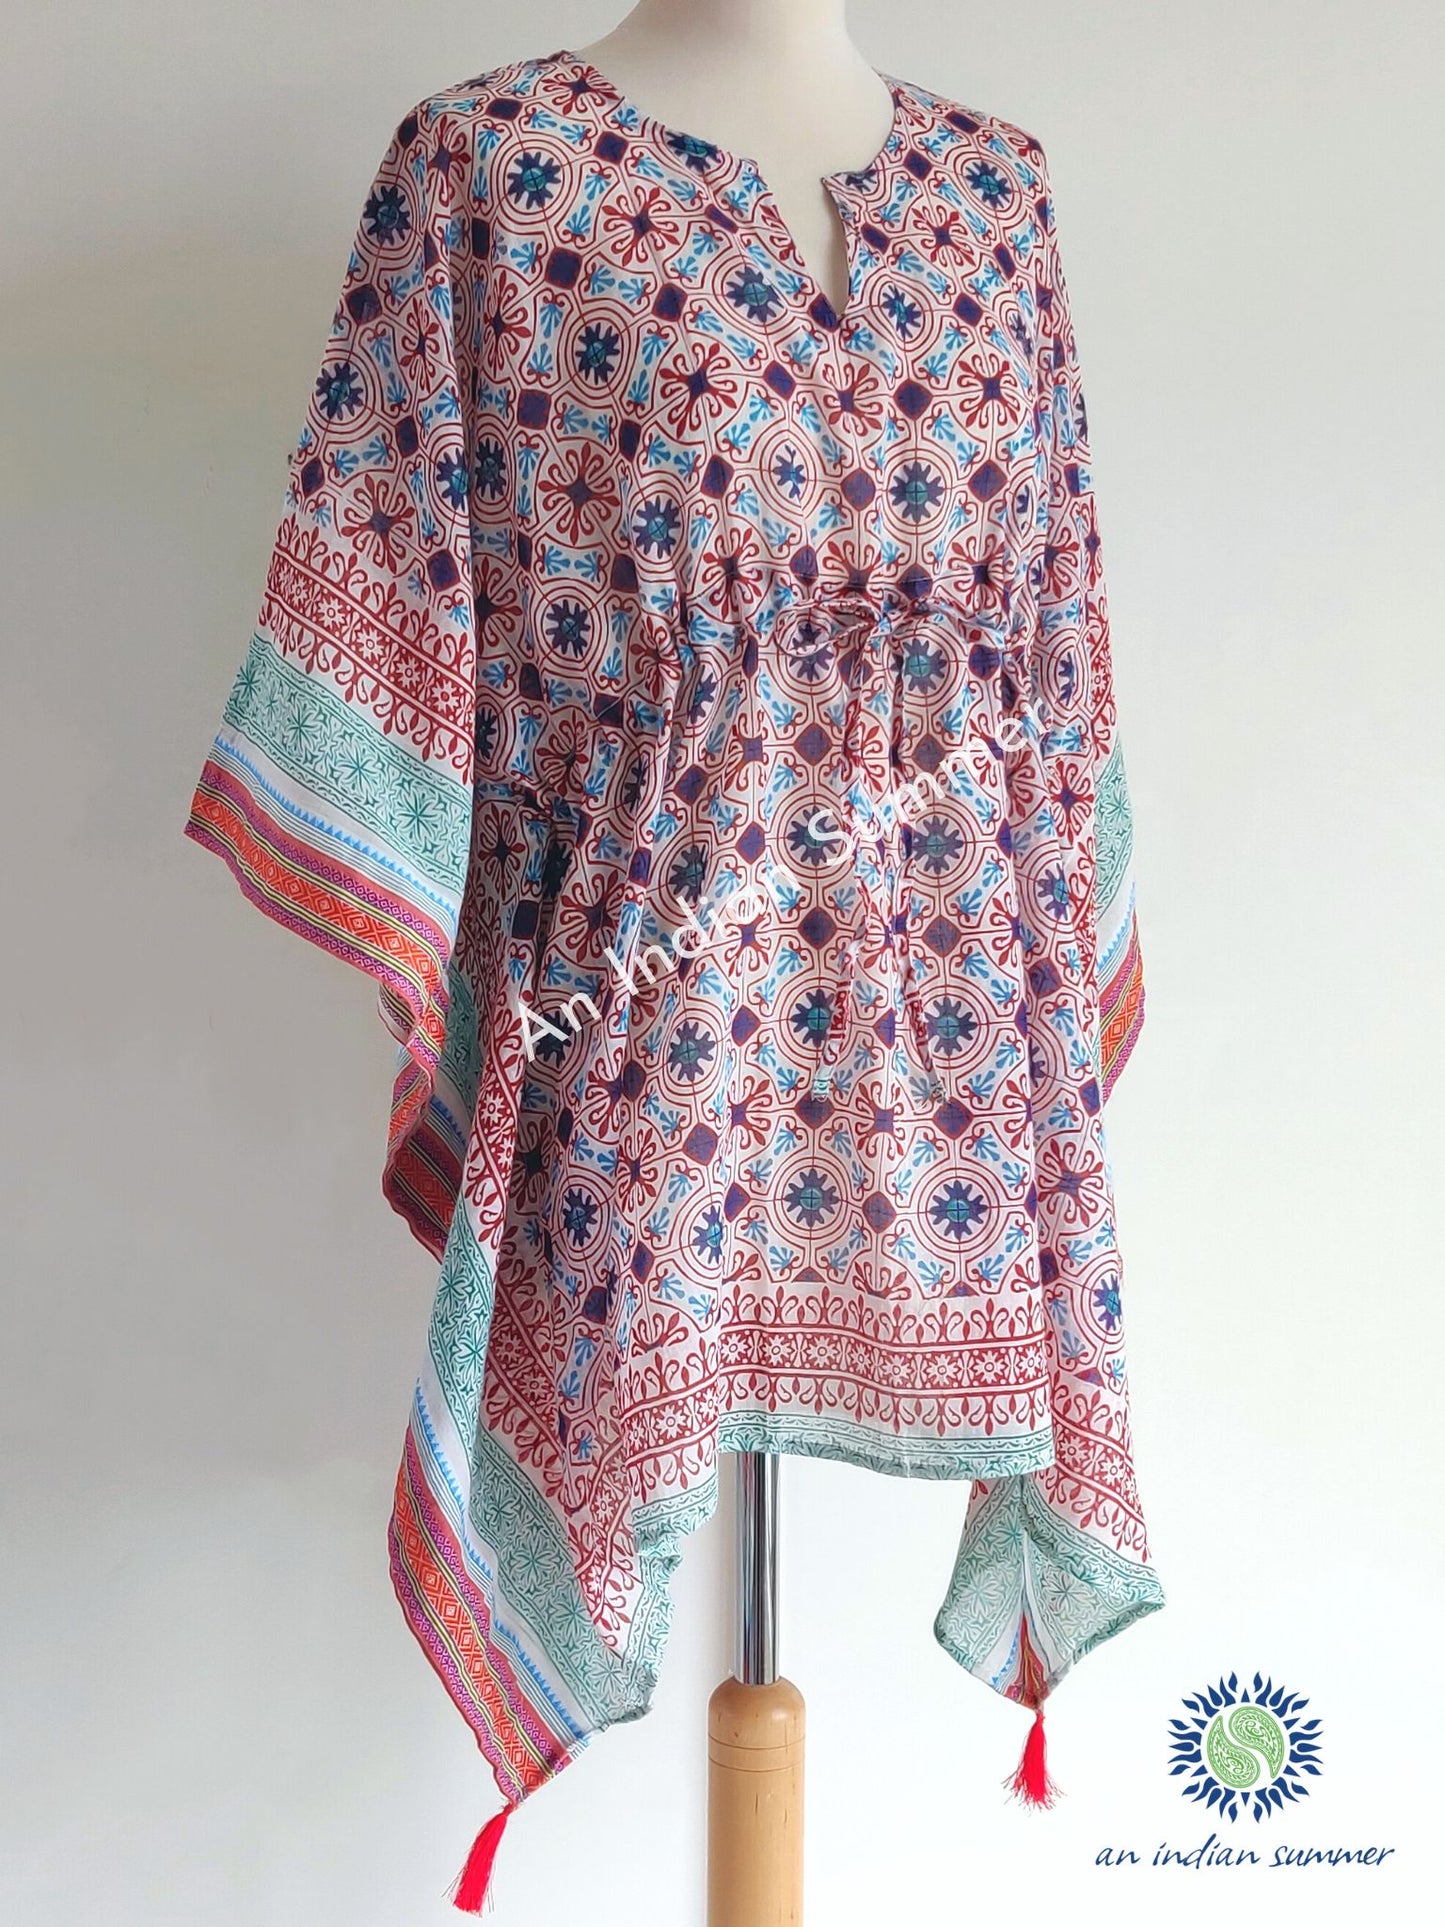 Short Poncho Kaftan Woven Border Tile Print  | Red | Hand Block Printed | Cotton Voile | An Indian Summer | Seasonless Timeless Sustainable Ethical Authentic Artisan Conscious Clothing Lifestyle Brand